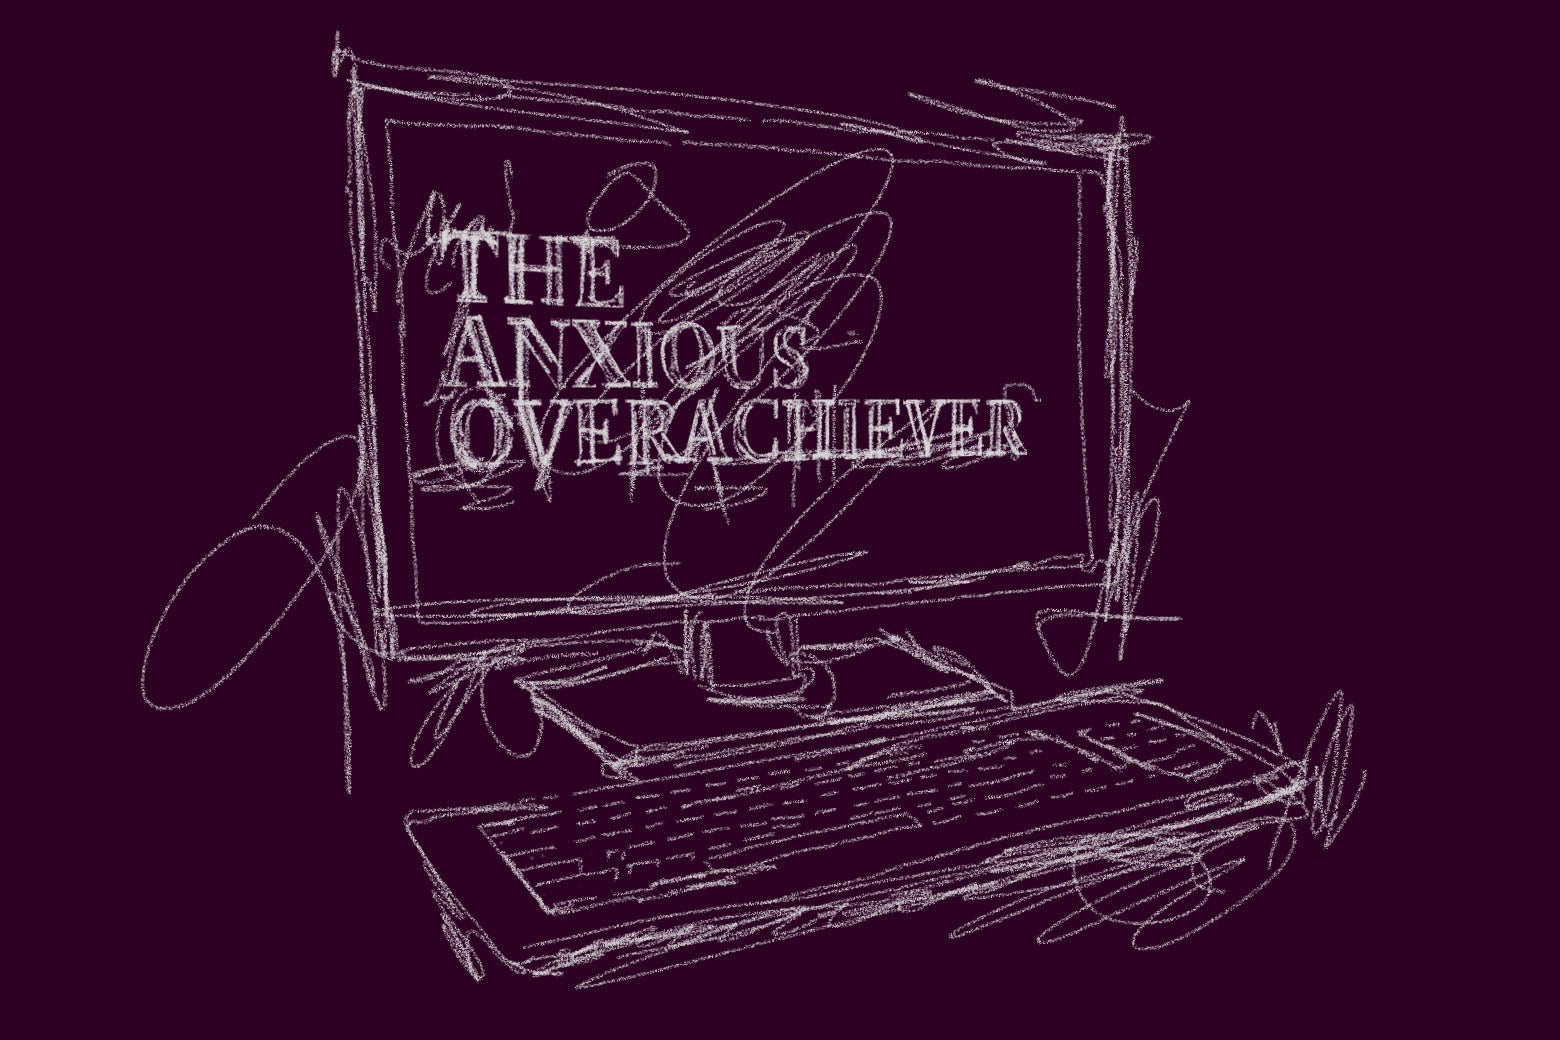 A sketch of a desktop computer is seen, with the words "The Anxious Overachiever" displayed on screen.